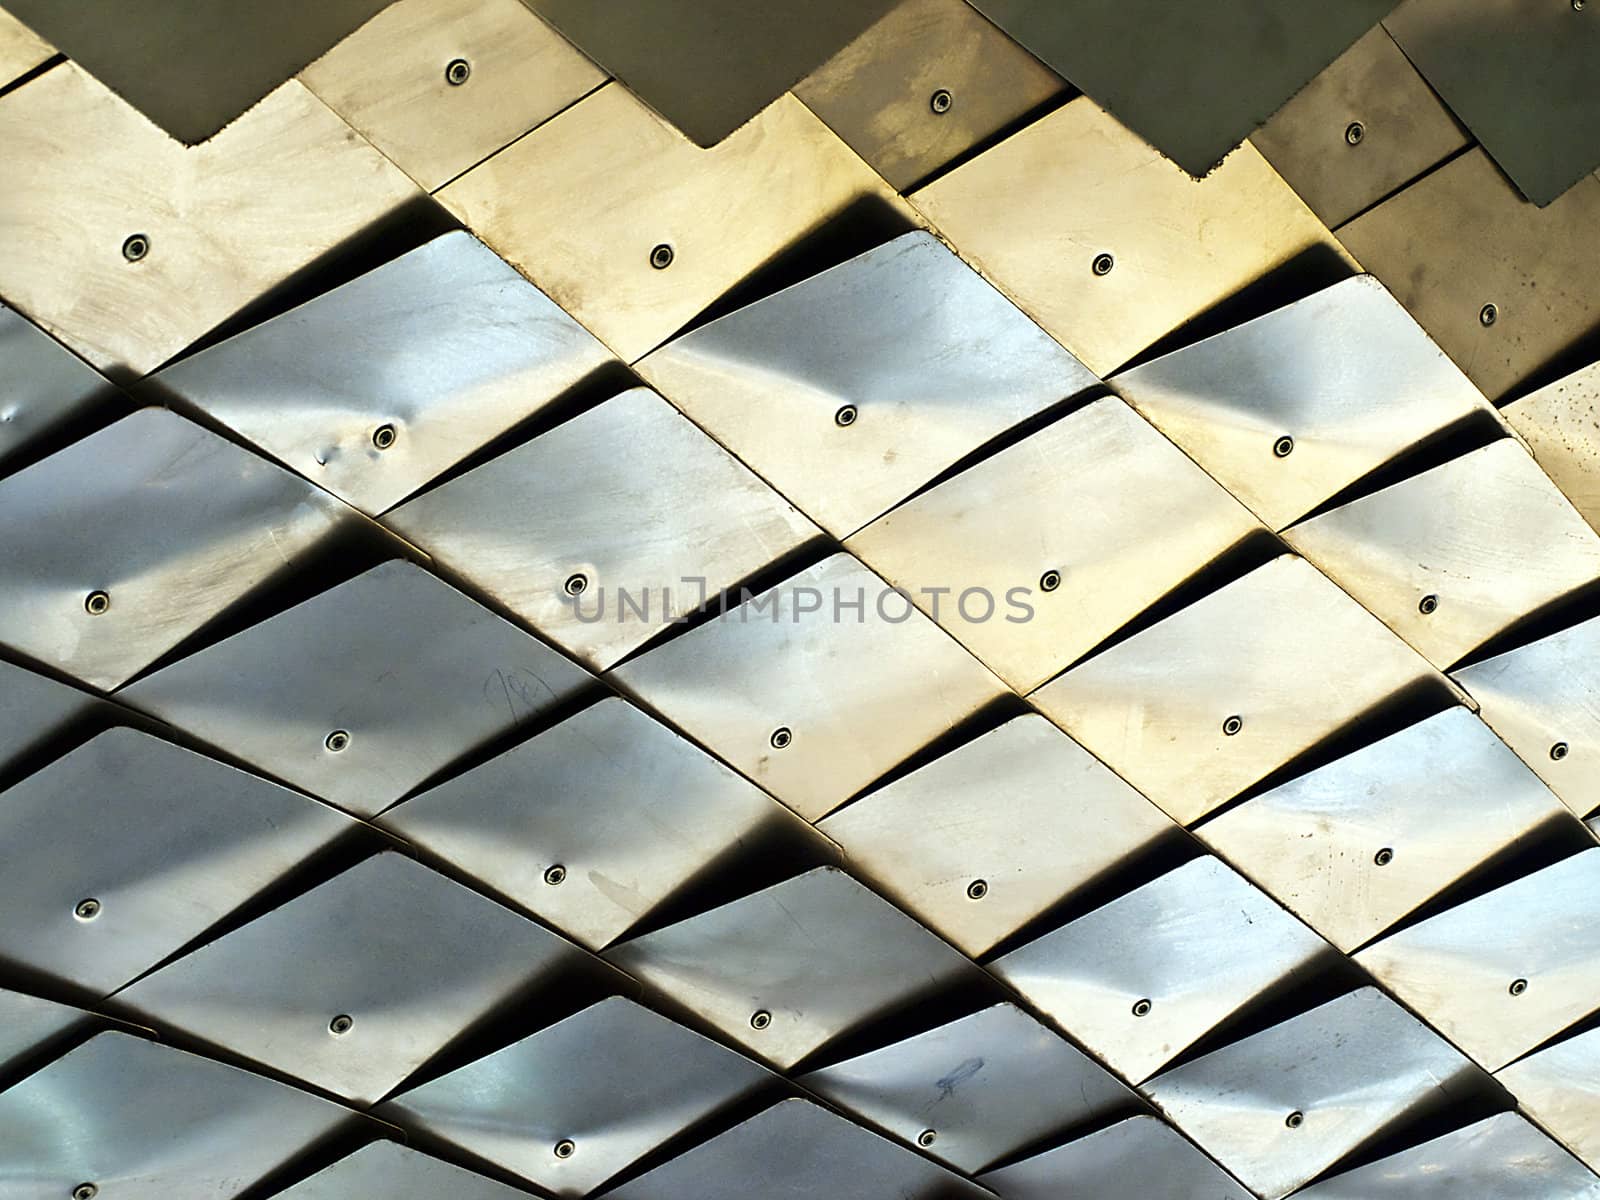 Detail of metallic scales that make up the underbelly of a dragon sculpture.